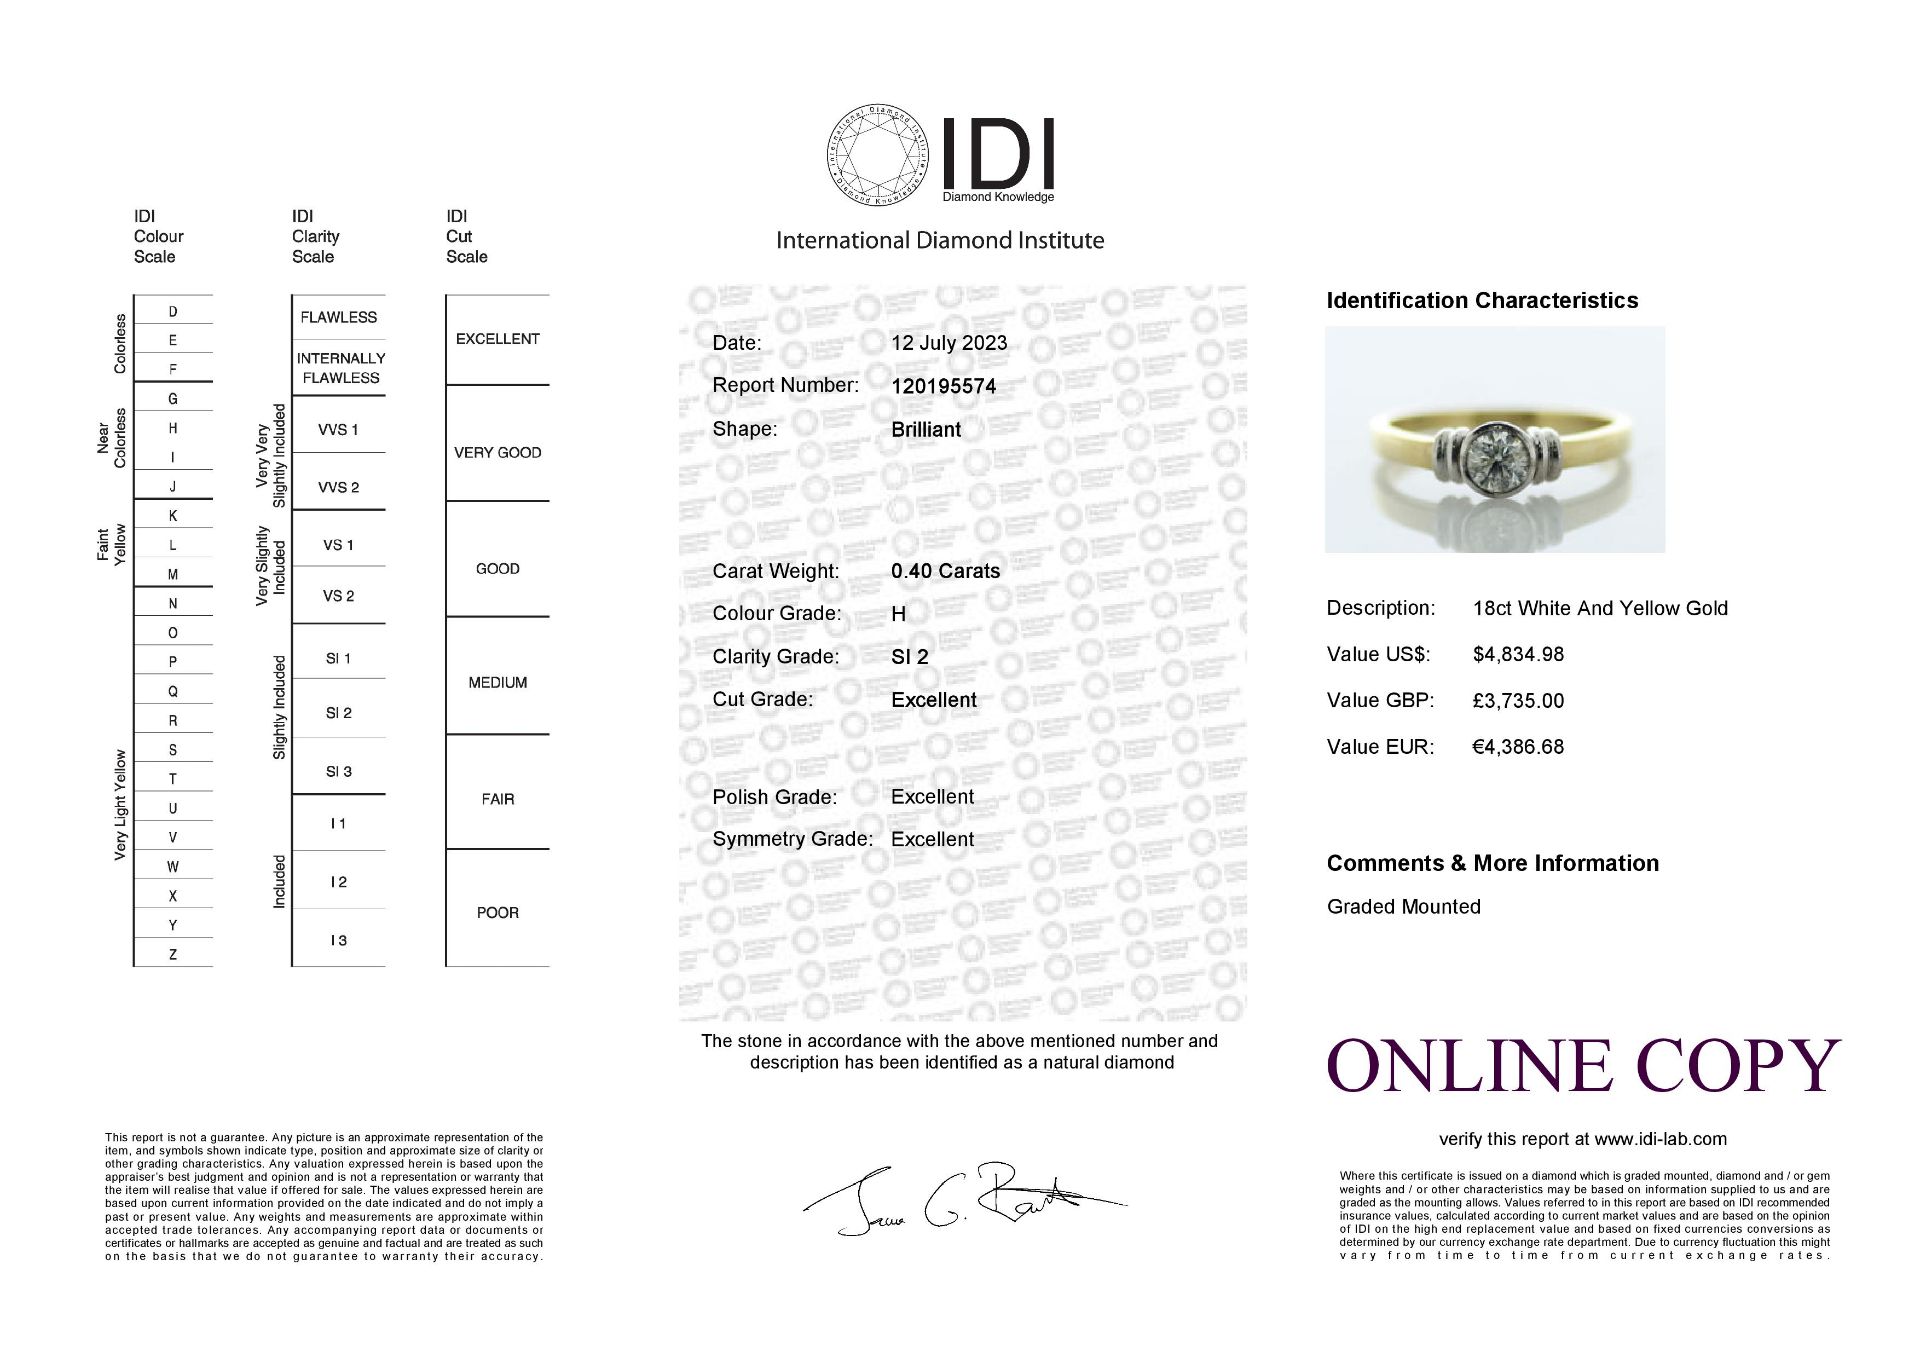 18ct Yellow Gold Single Stone Rub Over Set Diamond Ring 0.40 Carats - Valued By IDI £3,735.00 - A - Image 4 of 4